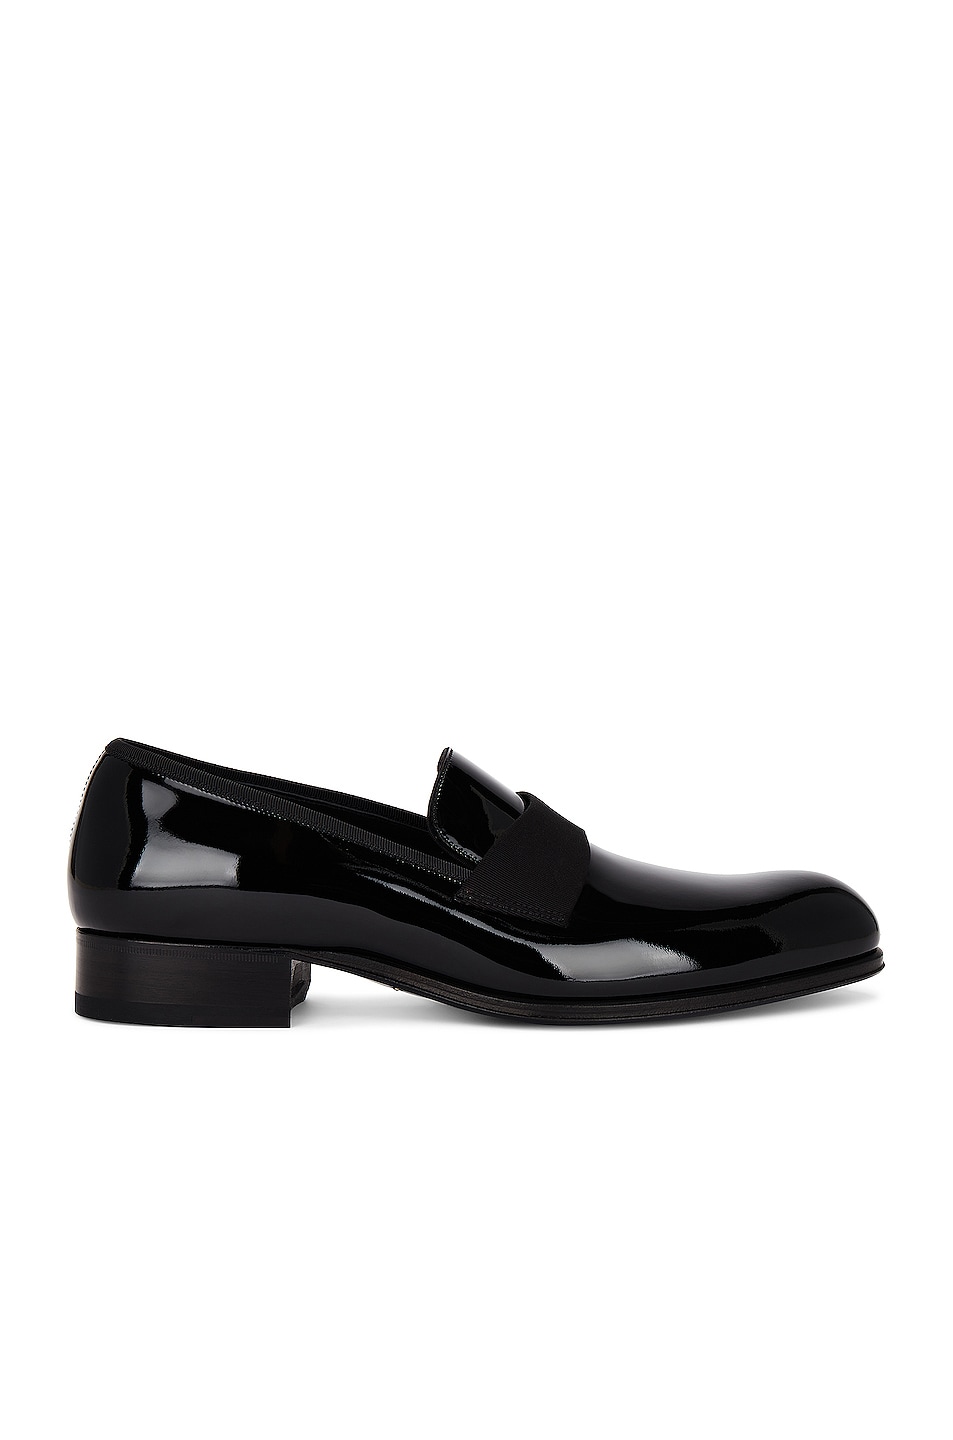 Patent Loafer in Black